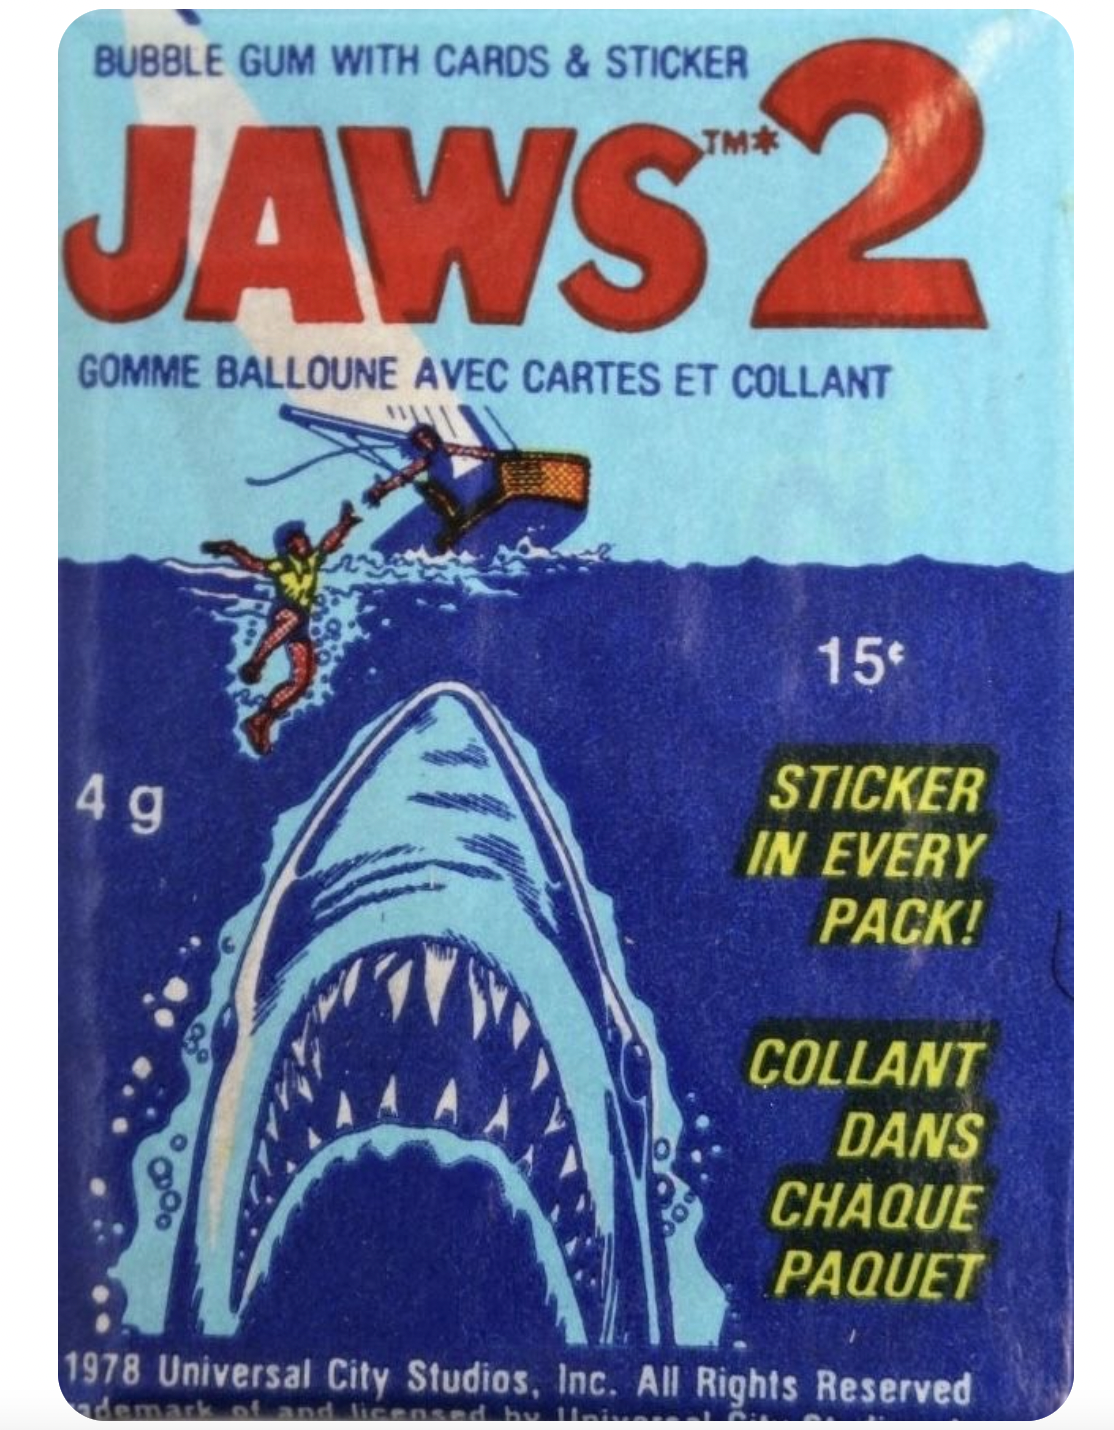 Jaws 2 - Sealed Pack of Trading Cards